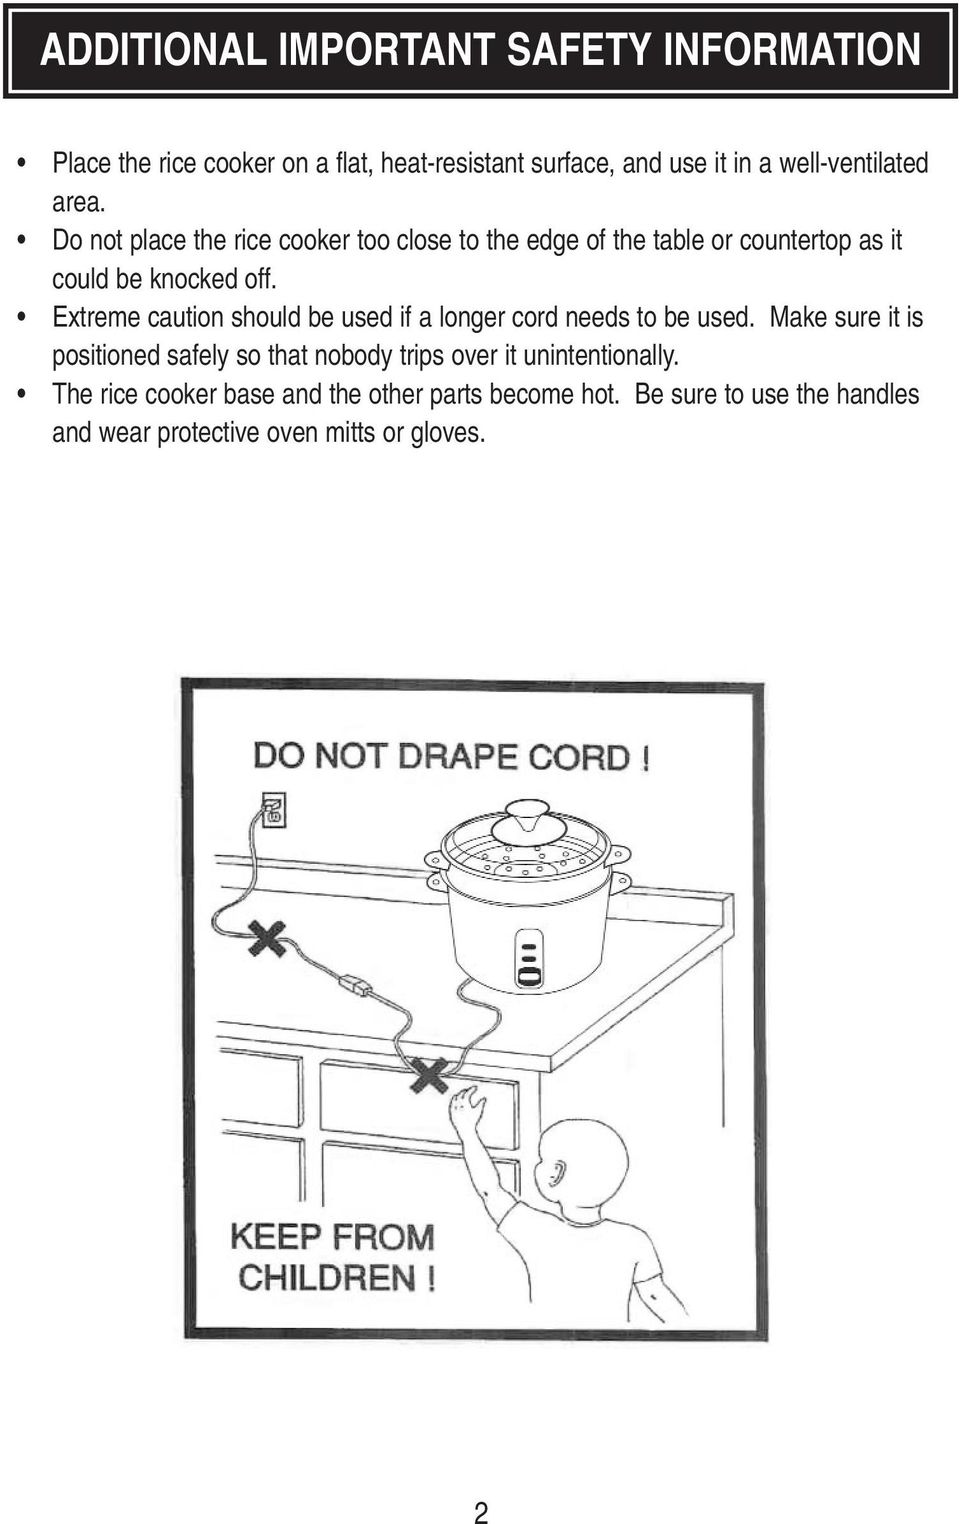 Extreme caution should be used if a longer cord needs to be used.